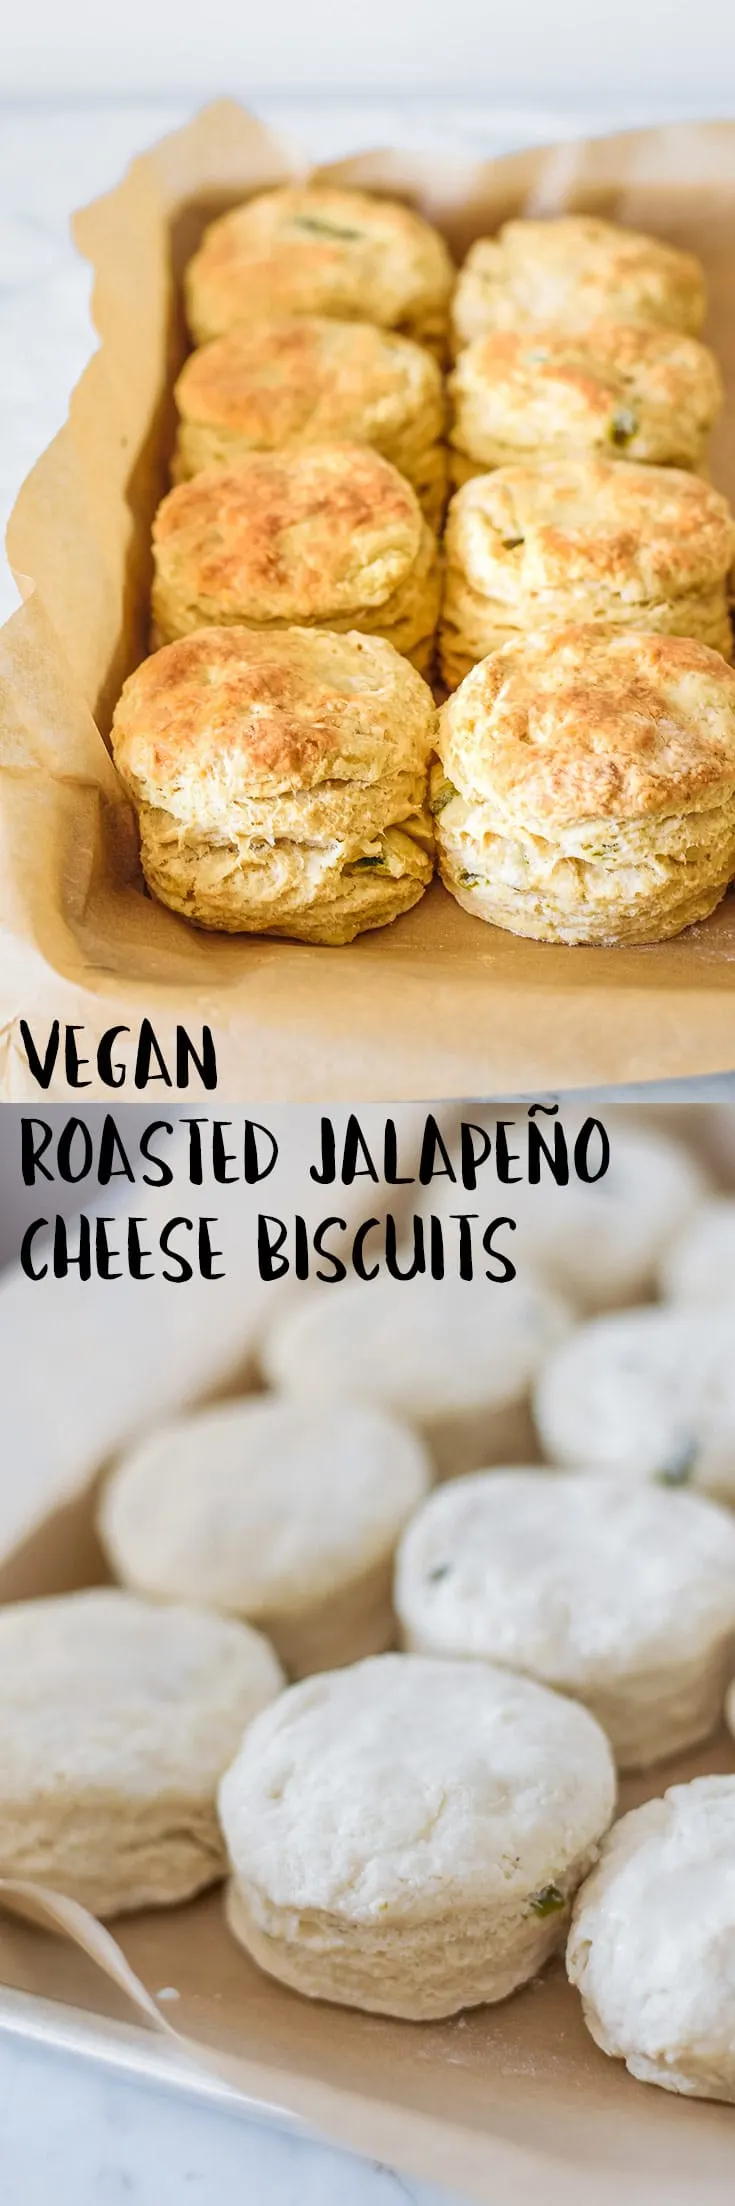 The best, flakiest, tallest, most beautifully layered biscuits you've ever seen are vegan and stuffed with homemade roasted jalapeño cheese. | thecuriouschickpea.com #vegan #biscuits #veganbrunch